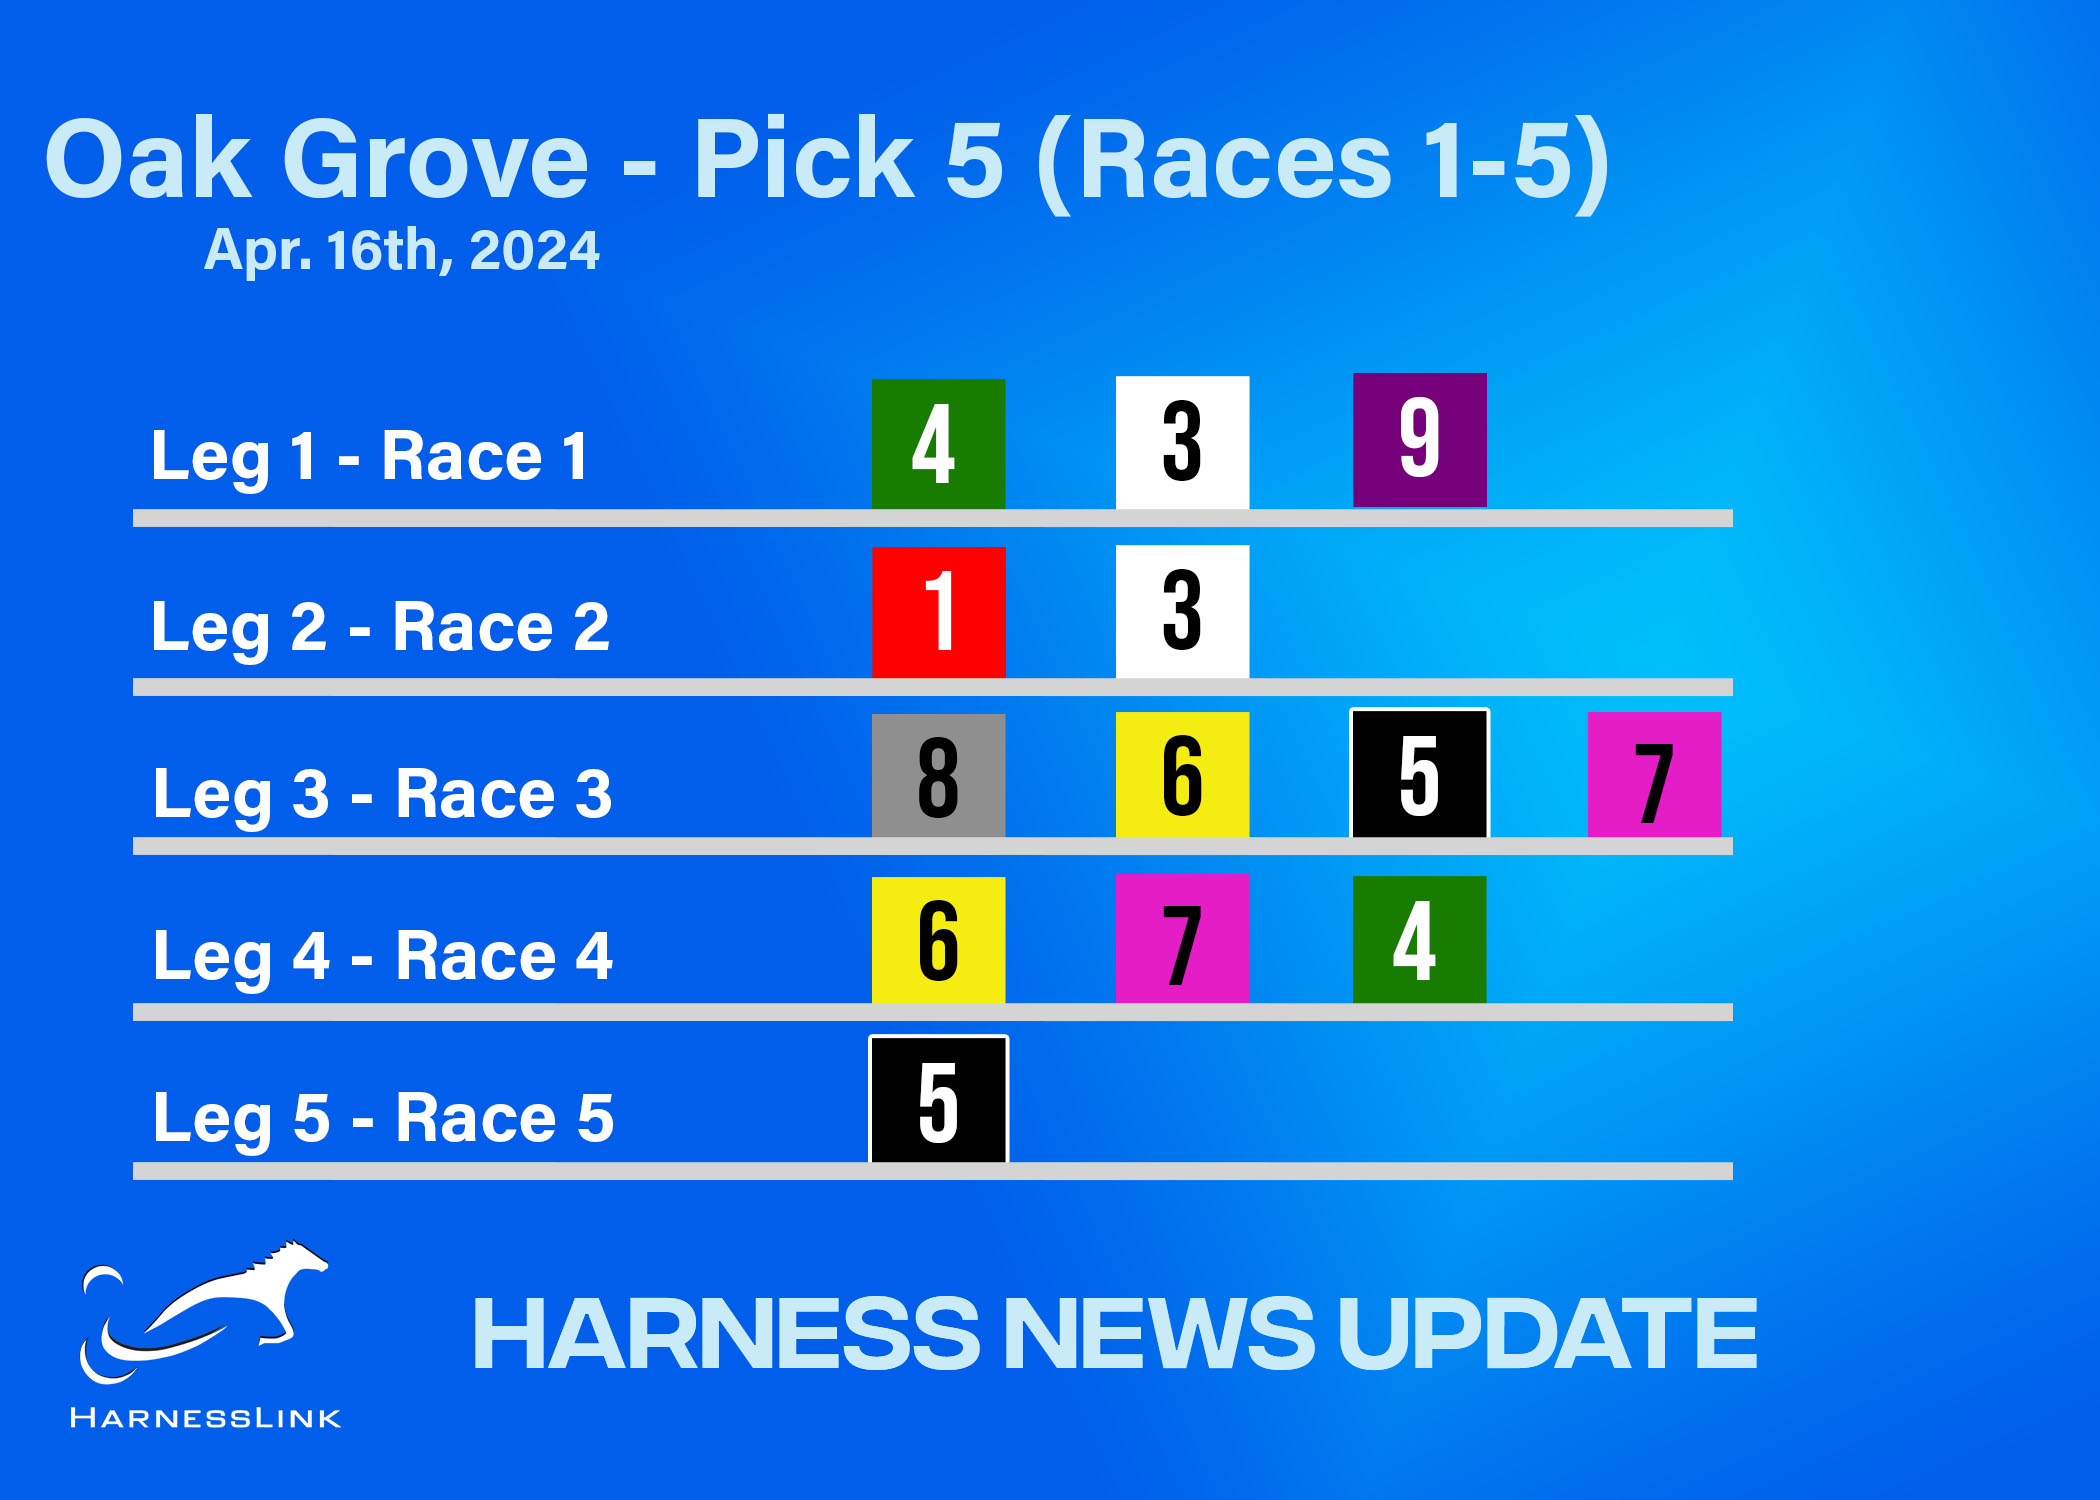 Harness News Update: Picks and analysis for Oak Grove April 16